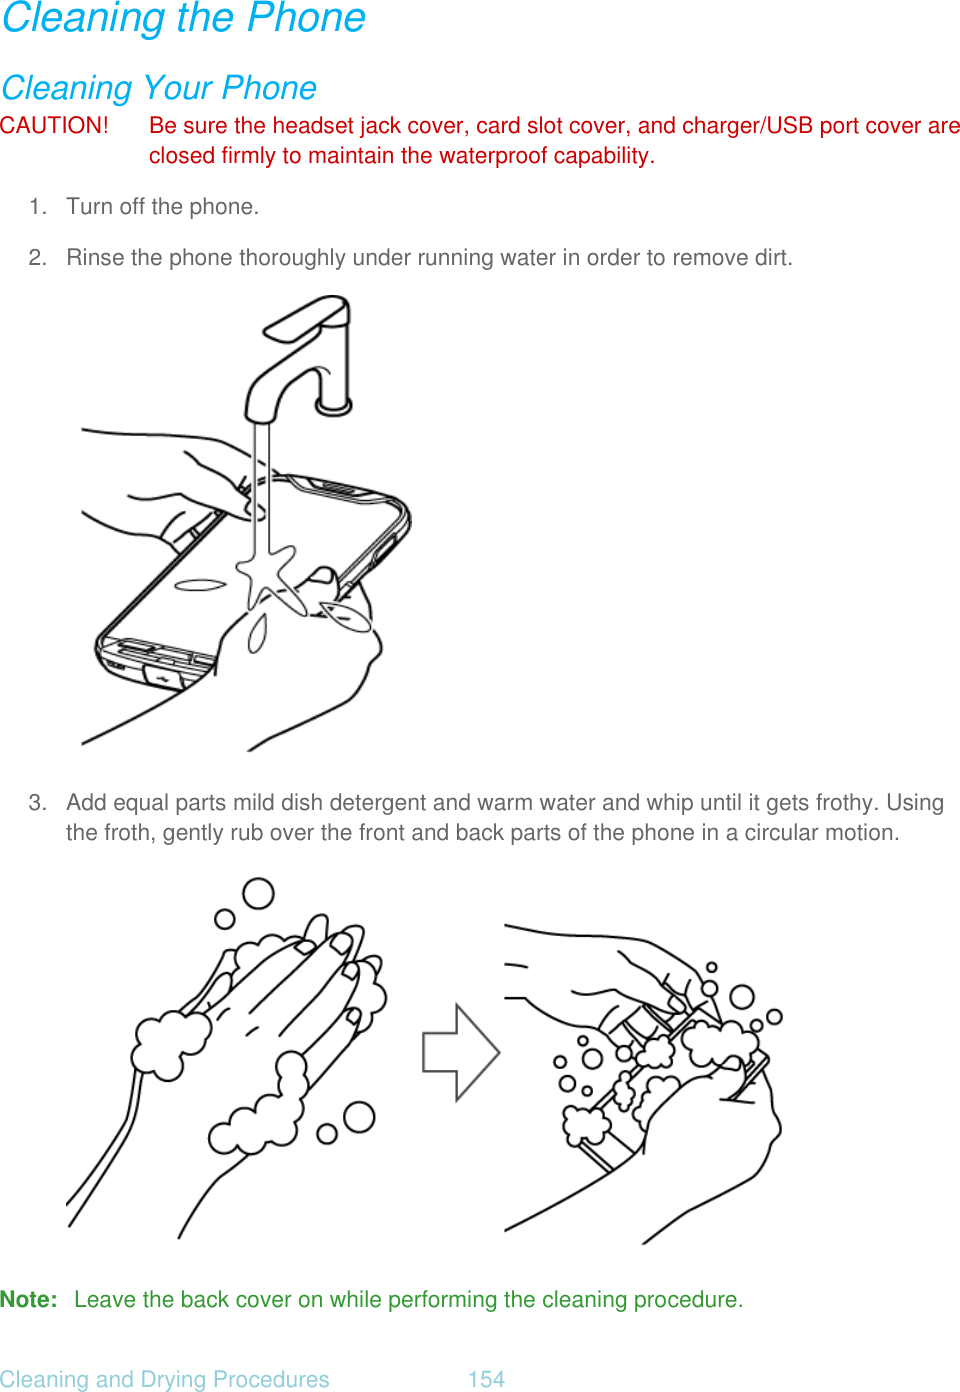 Cleaning and Drying Procedures  154   Cleaning the Phone Cleaning Your Phone CAUTION!  Be sure the headset jack cover, card slot cover, and charger/USB port cover are closed firmly to maintain the waterproof capability. 1. Turn off the phone. 2.  Rinse the phone thoroughly under running water in order to remove dirt.  3.  Add equal parts mild dish detergent and warm water and whip until it gets frothy. Using the froth, gently rub over the front and back parts of the phone in a circular motion.  Note:  Leave the back cover on while performing the cleaning procedure. 